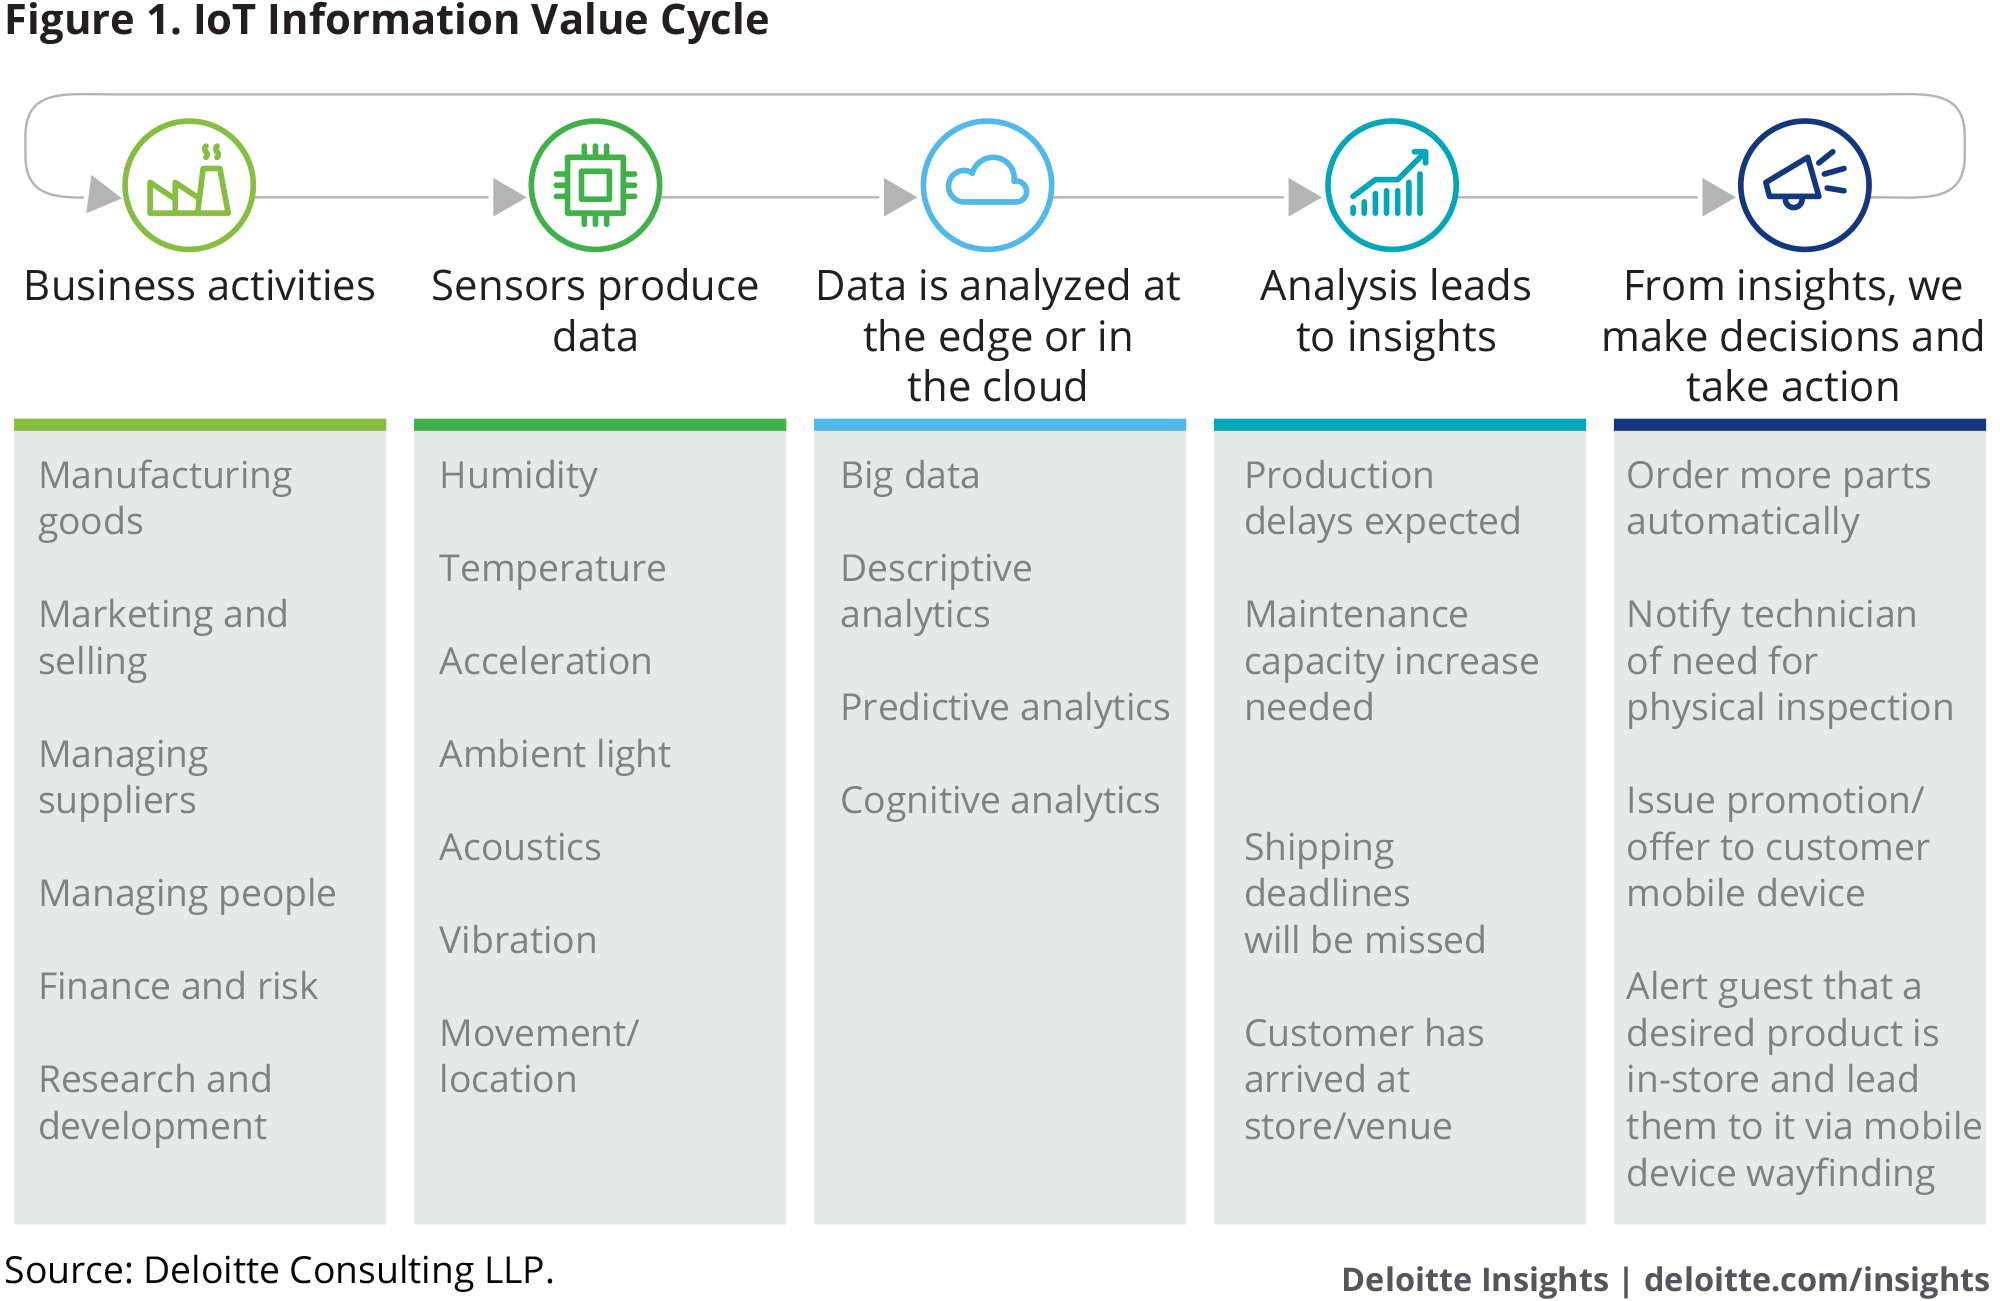 IoT Information Value Cycle